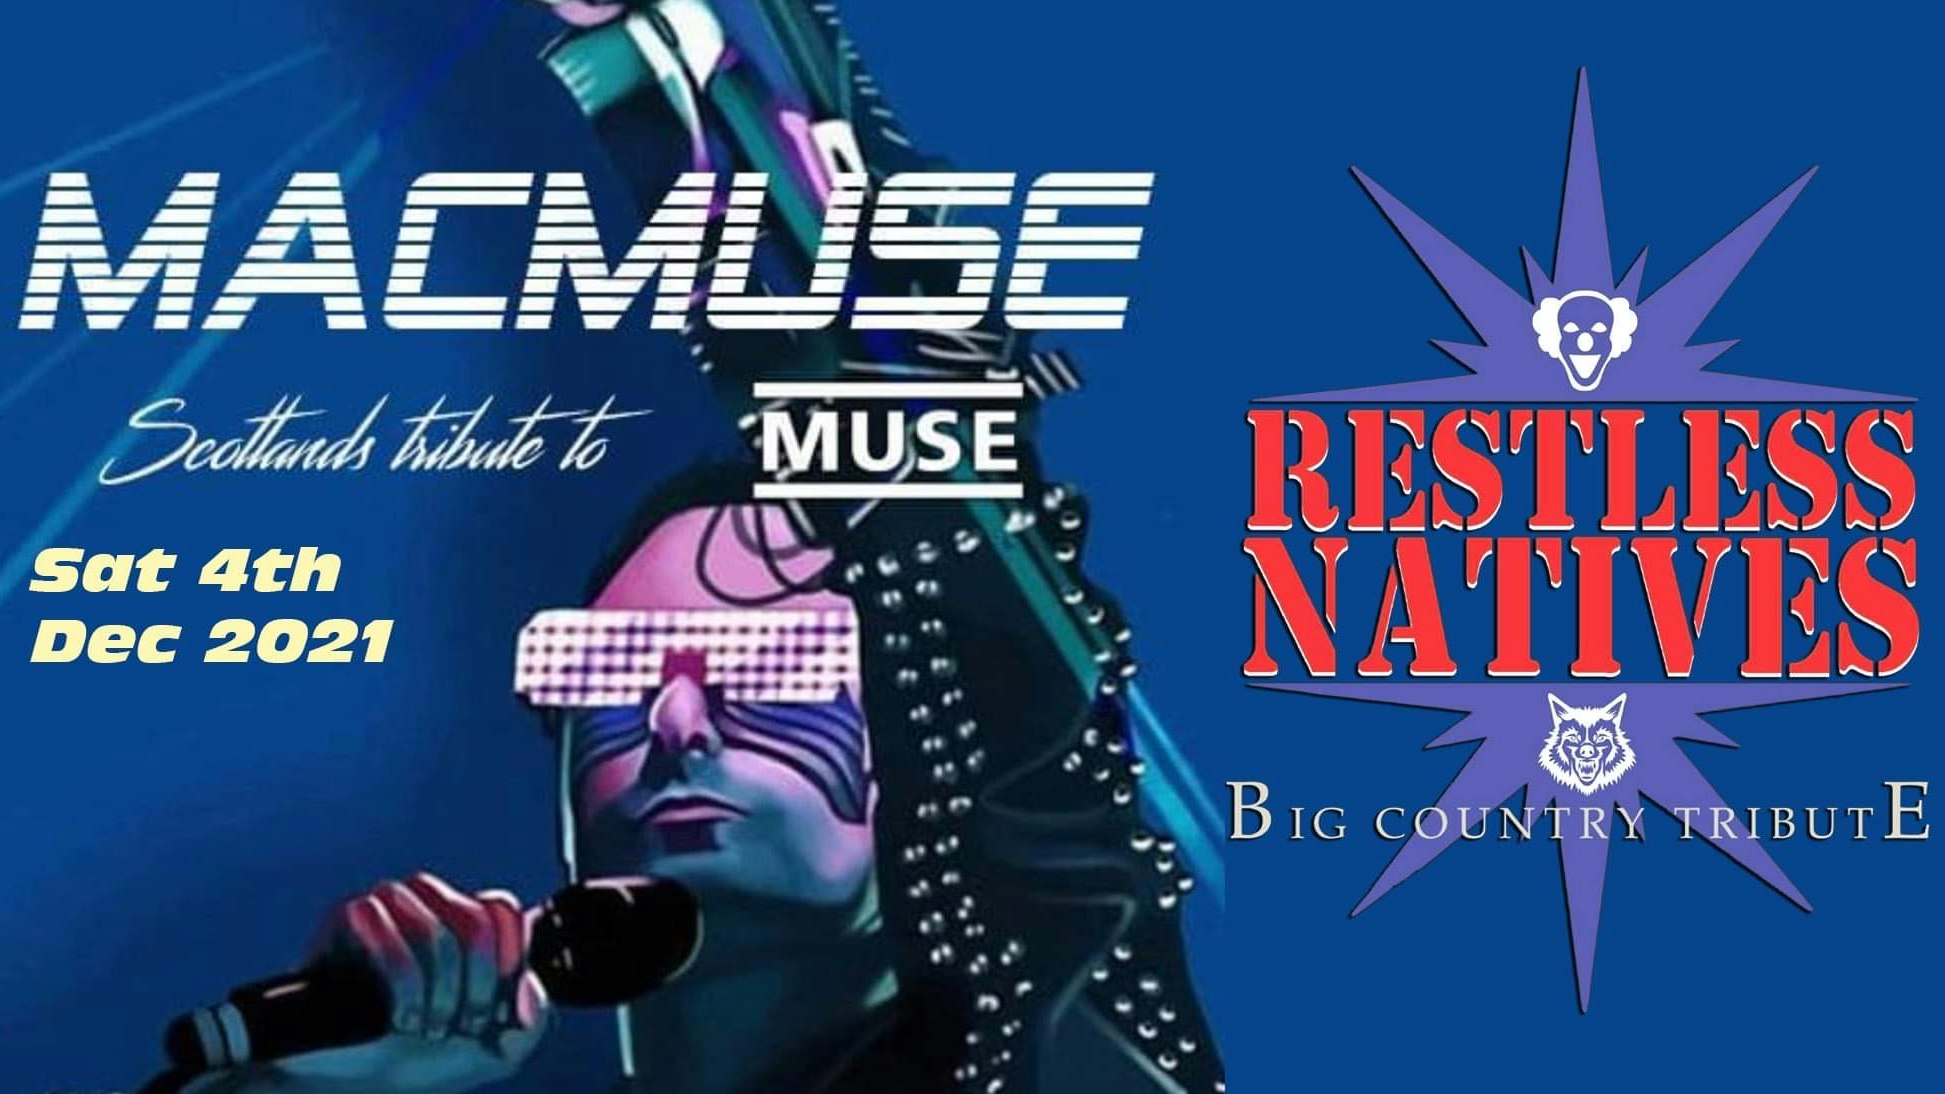 MACMUSE (Muse Tribute) + BIG COUNTRY Tribute!